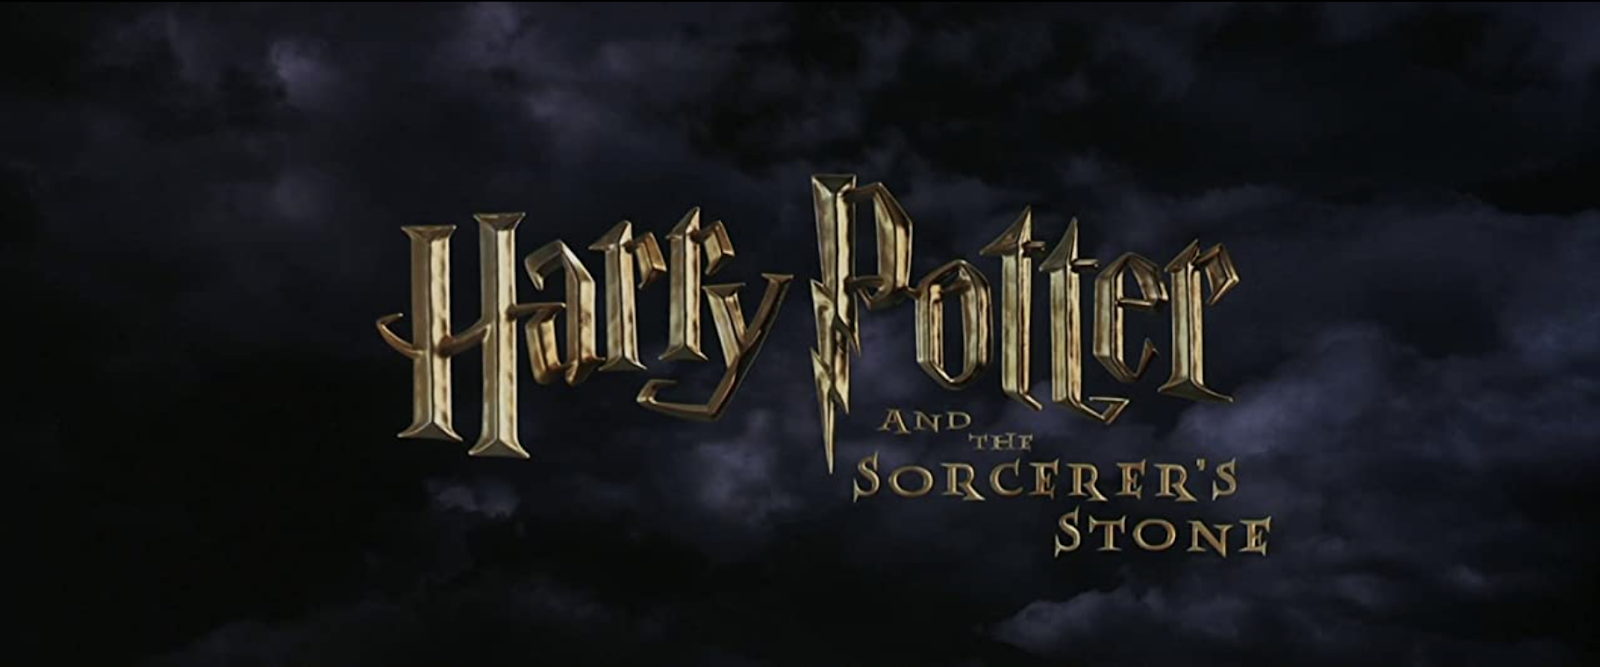 Harry Potter title sequence